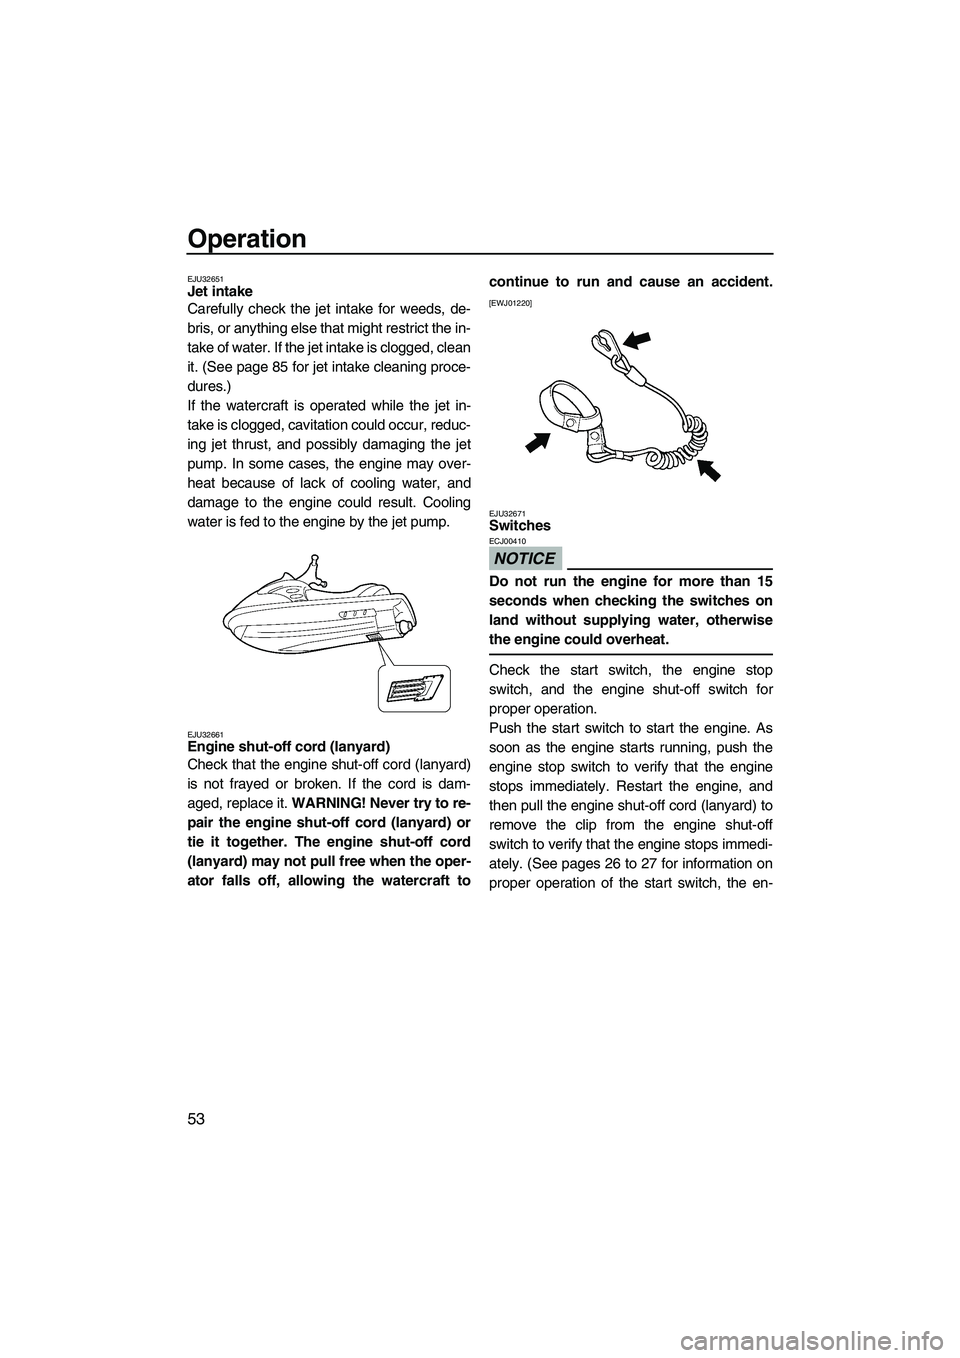 YAMAHA FZS 2009  Owners Manual Operation
53
EJU32651Jet intake 
Carefully check the jet intake for weeds, de-
bris, or anything else that might restrict the in-
take of water. If the jet intake is clogged, clean
it. (See page 85 fo